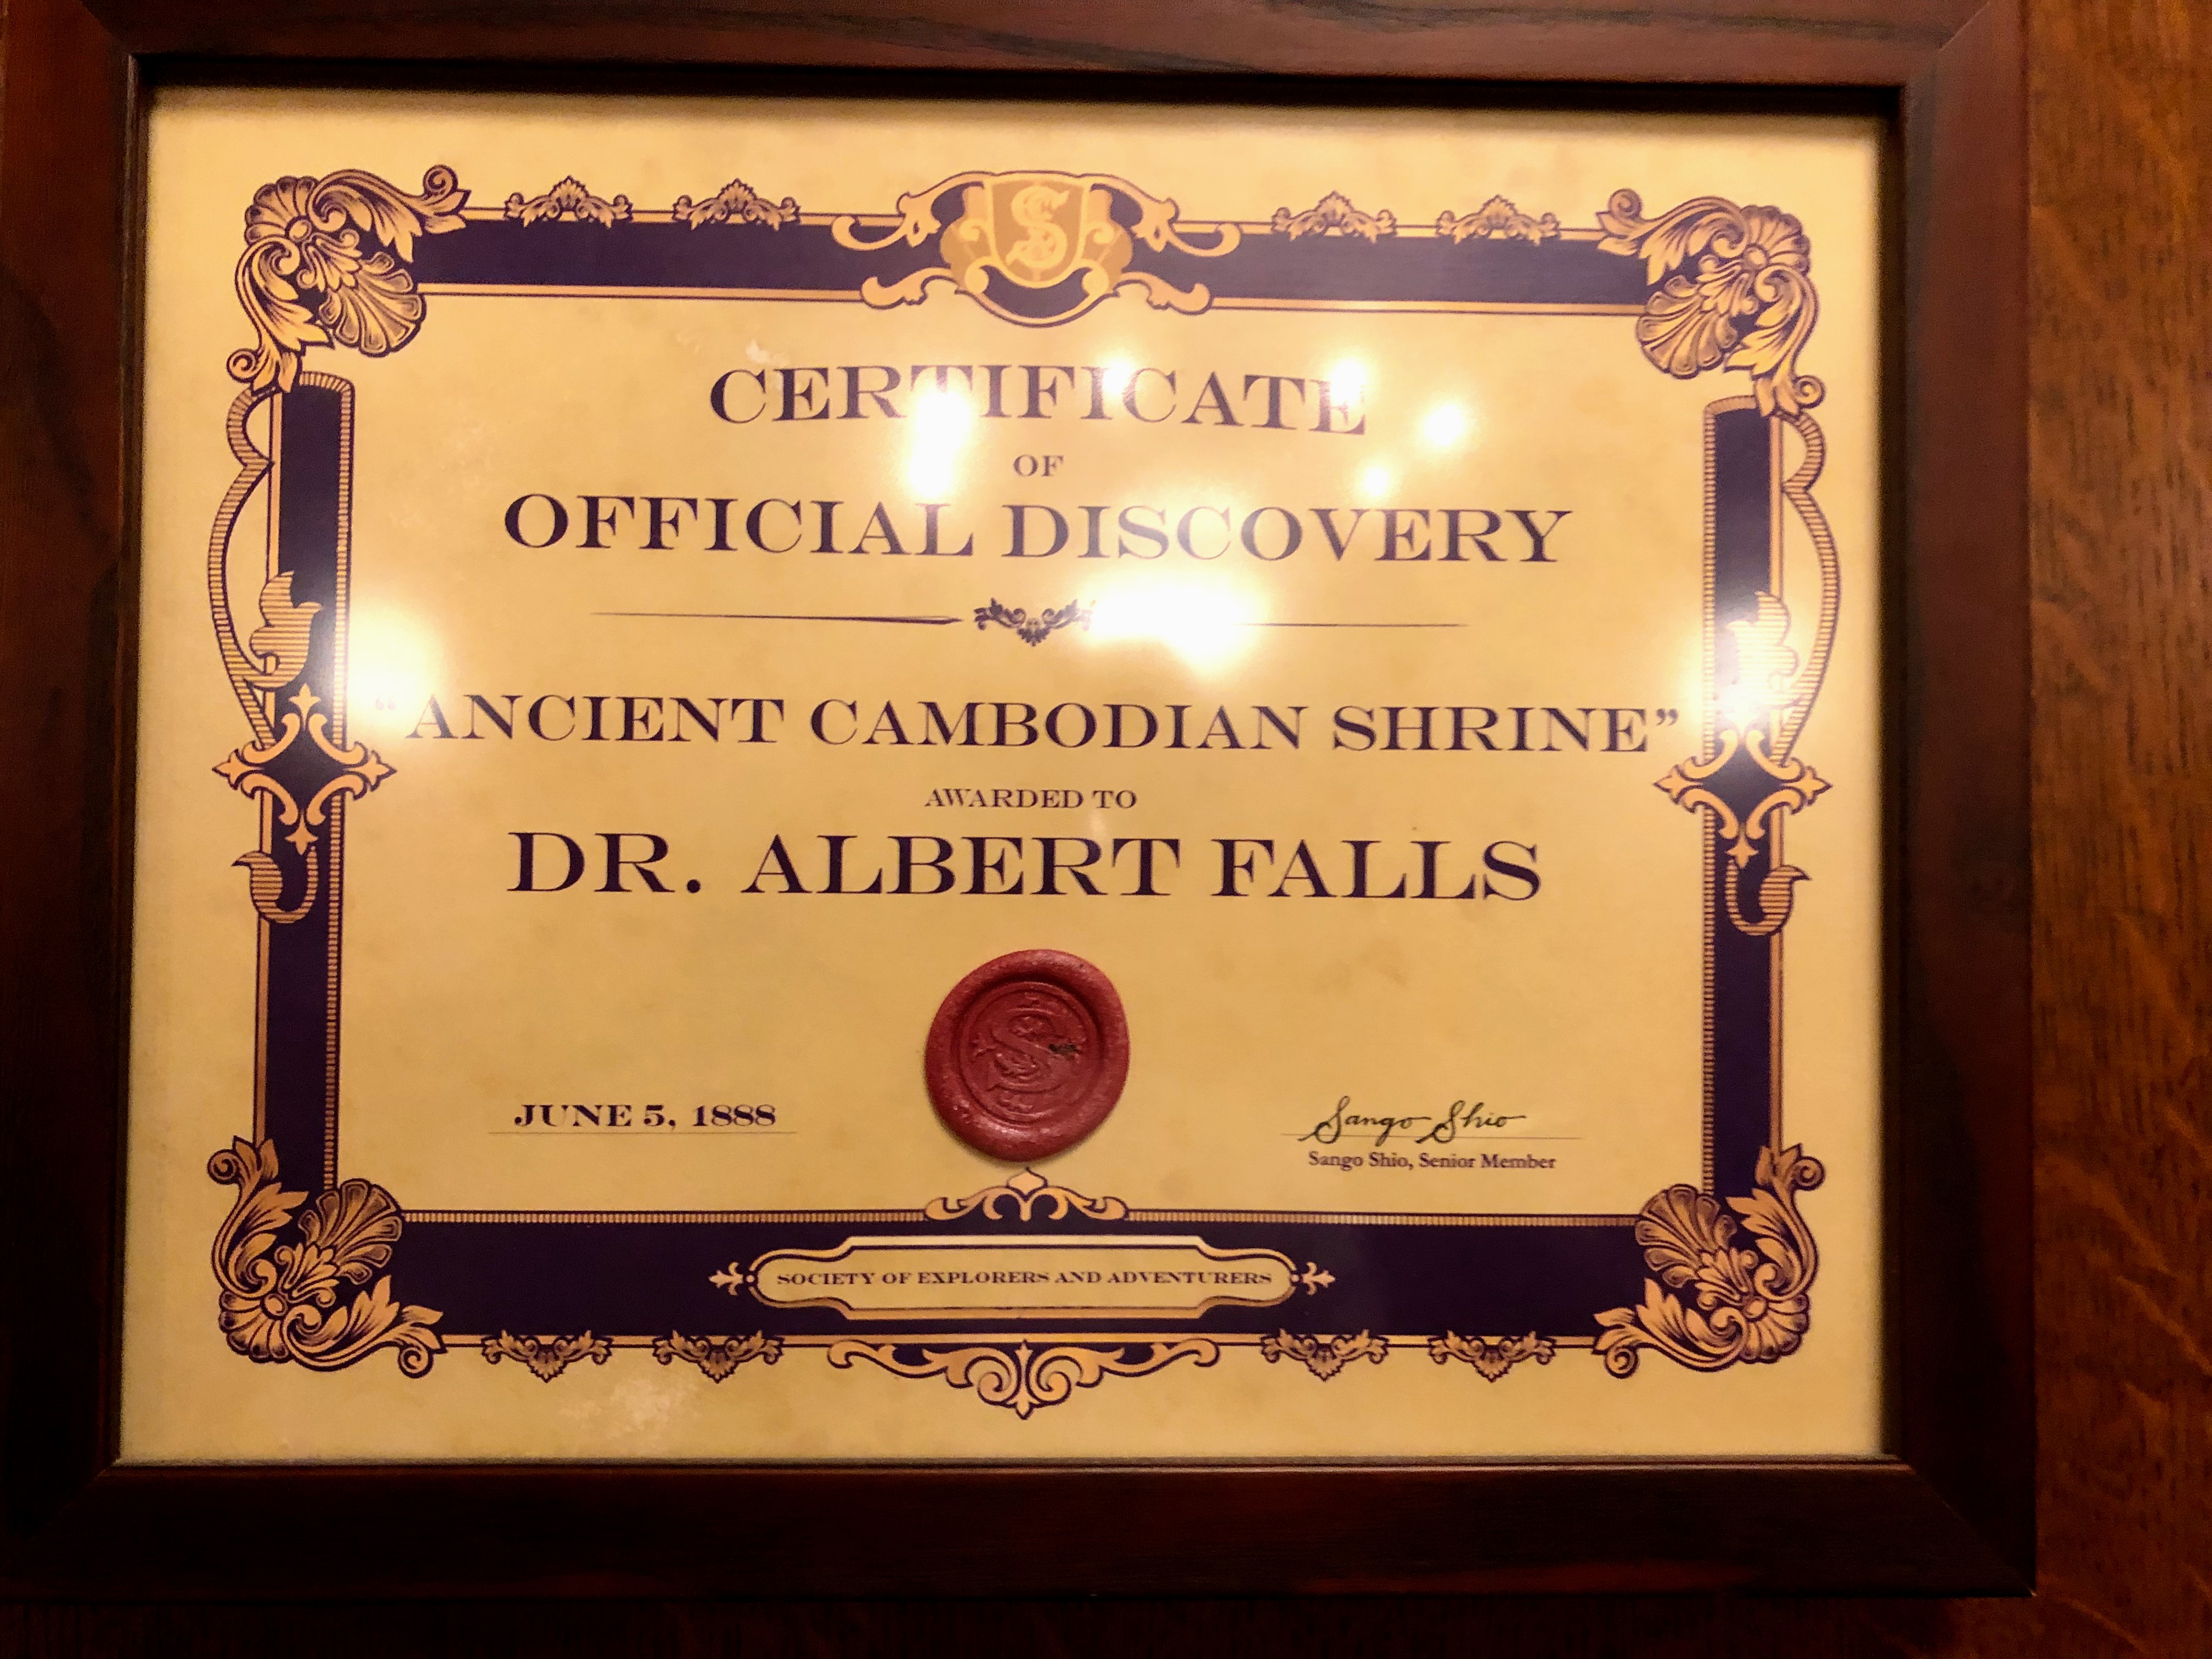 Certificate of Offical Discovery - Cambodian Shrine - Dr Albert Falls